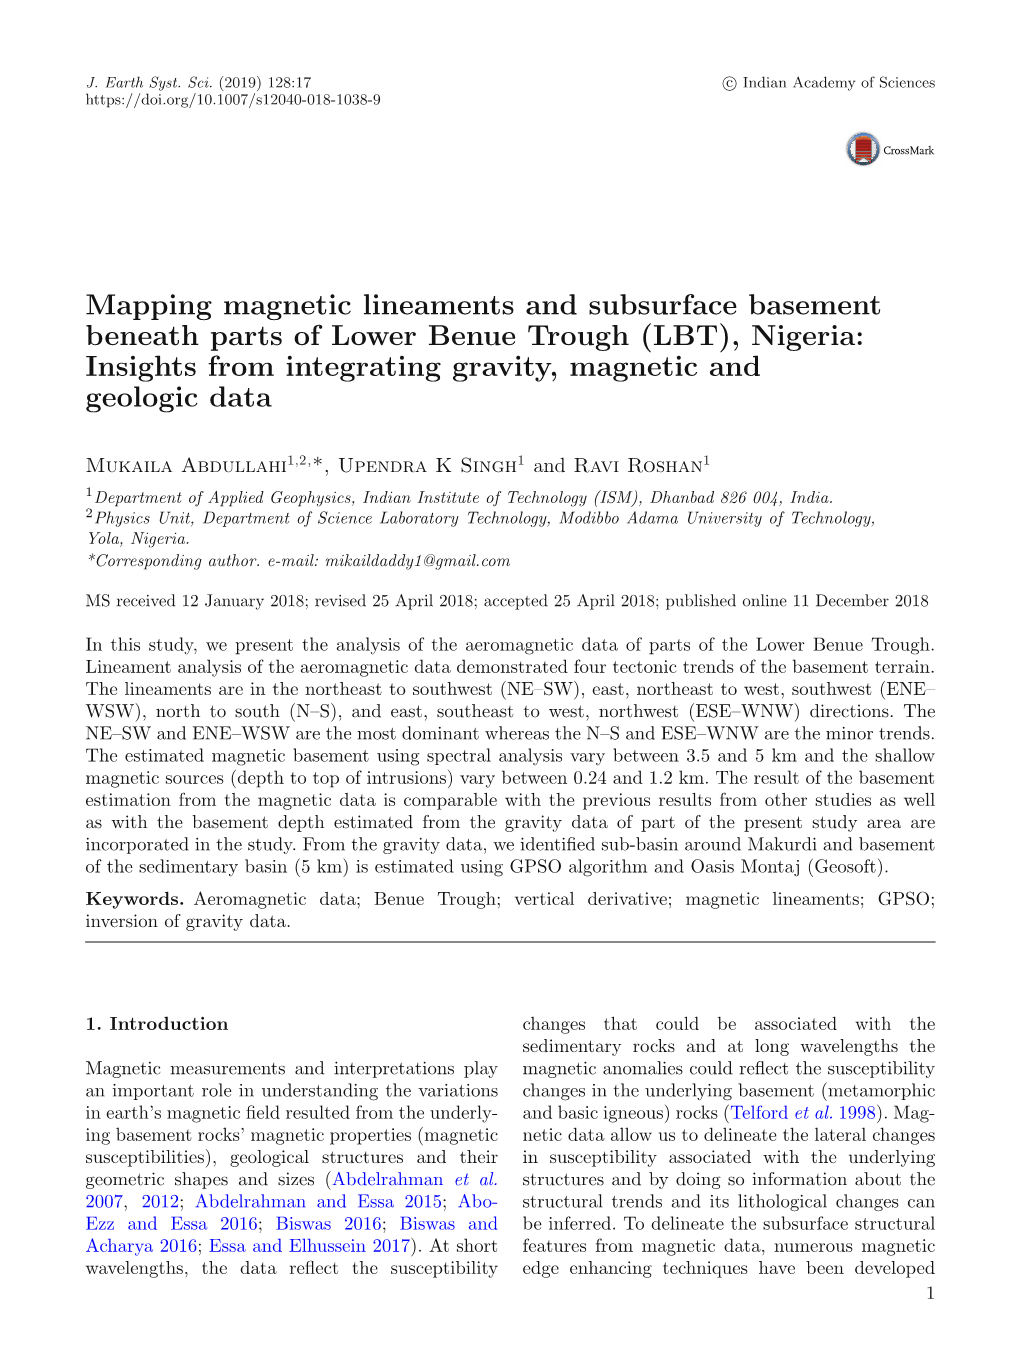 Mapping Magnetic Lineaments and Subsurface Basement Beneath Parts of Lower Benue Trough (LBT), Nigeria: Insights from Integrating Gravity, Magnetic and Geologic Data